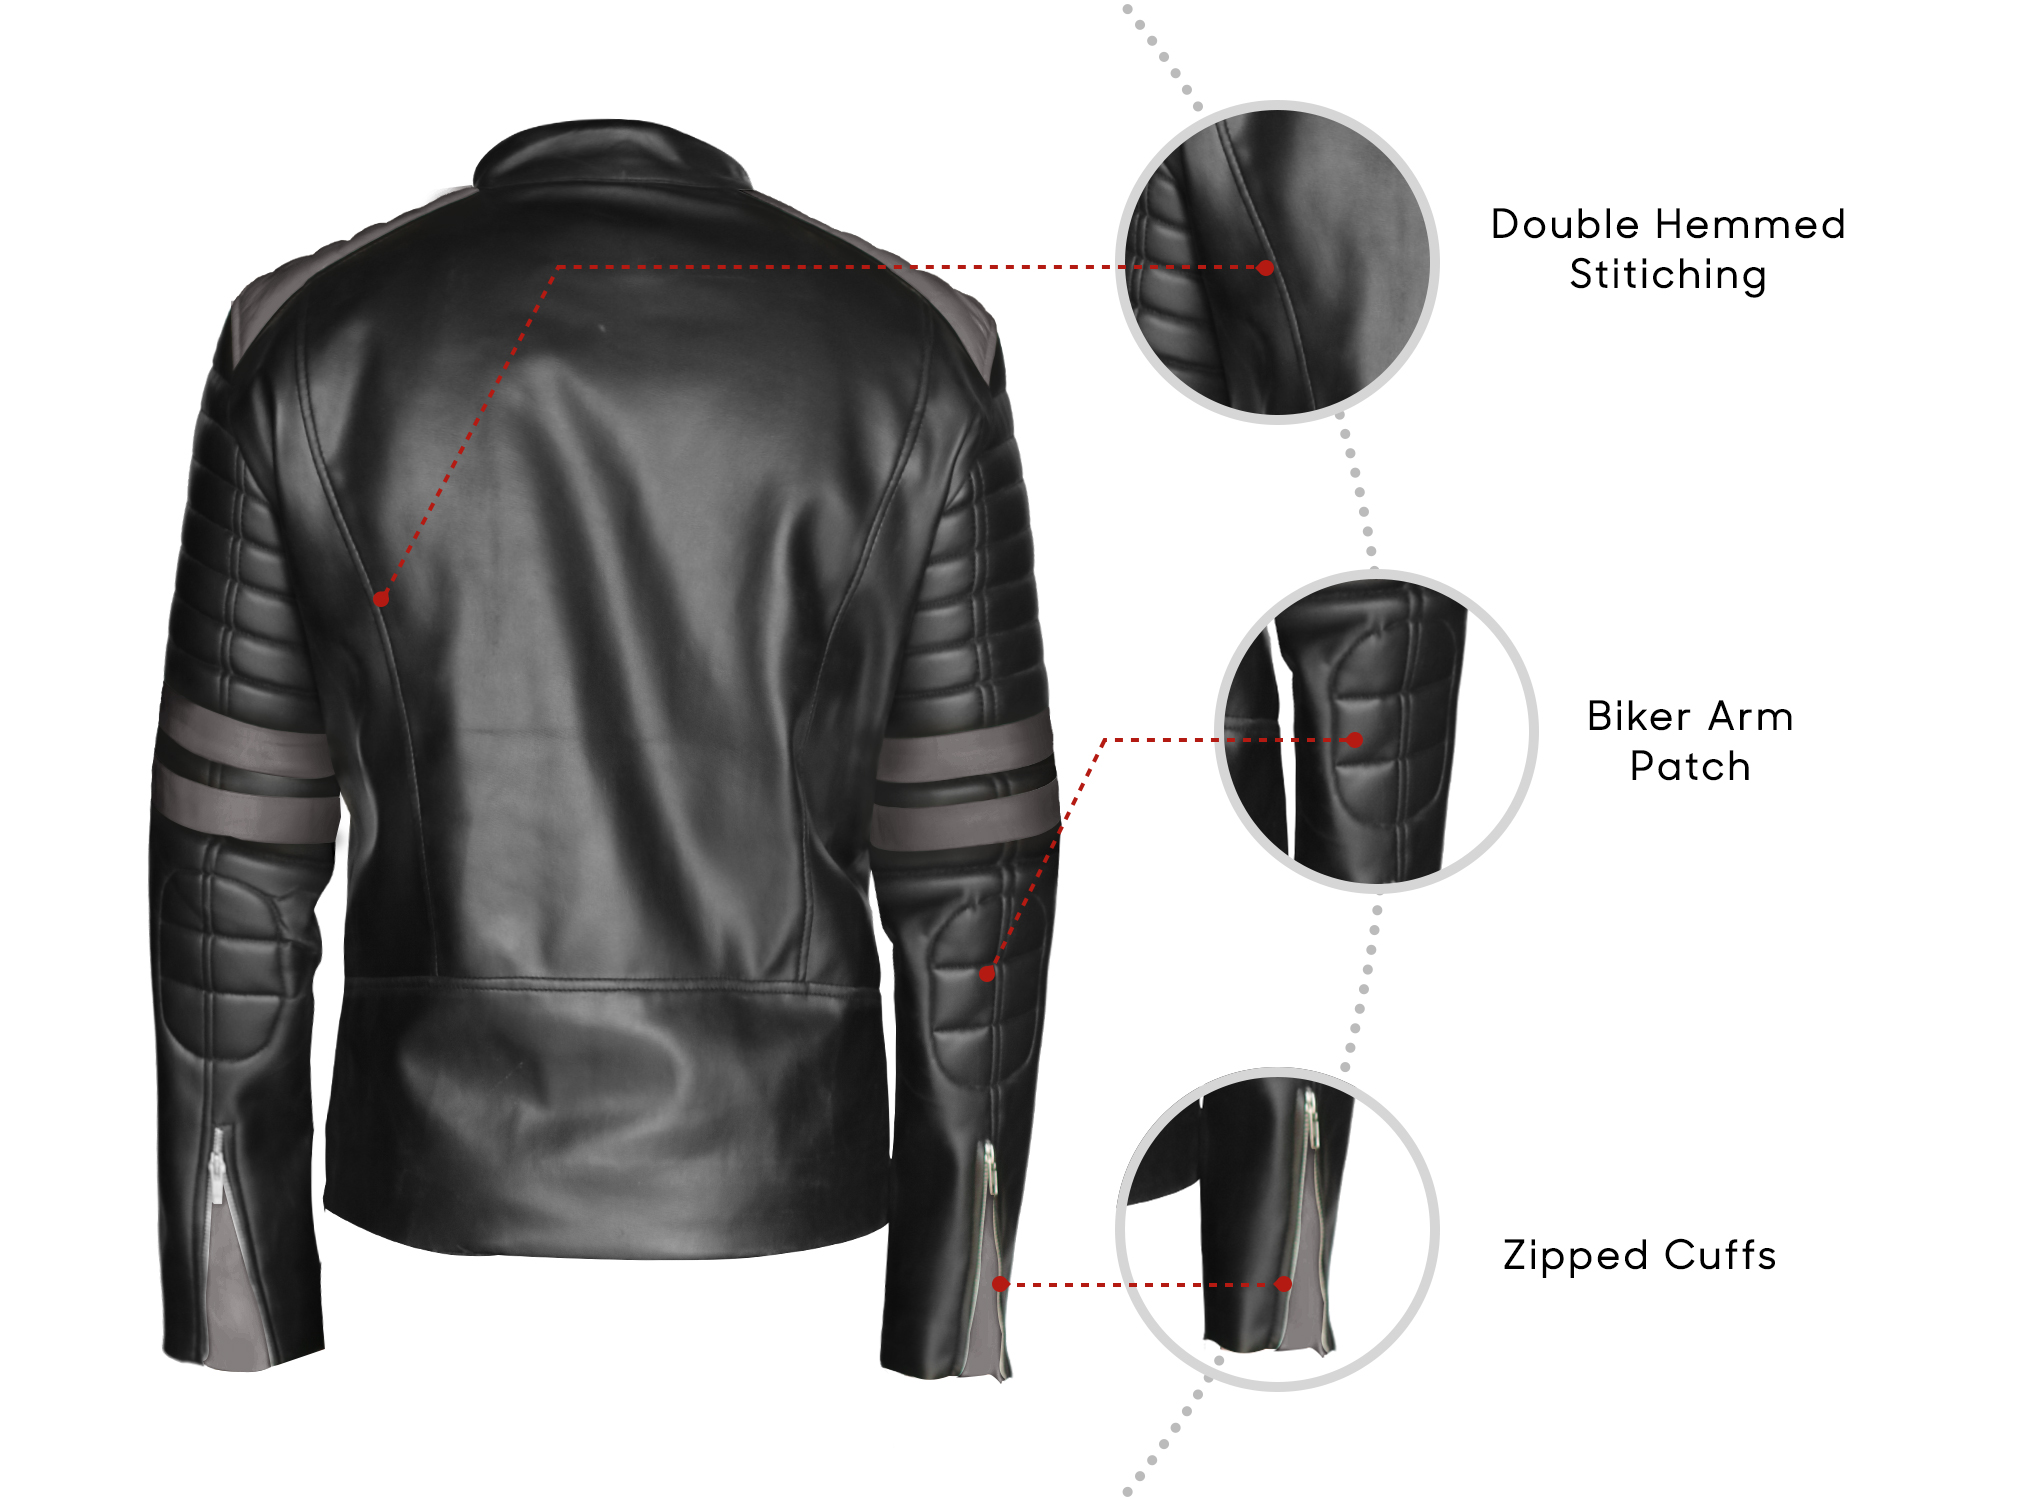 NomiLeather black leather jacket | mens leather jacket and genuine leather jacket men (Black With Grey Strip ) X-Small - image 5 of 7